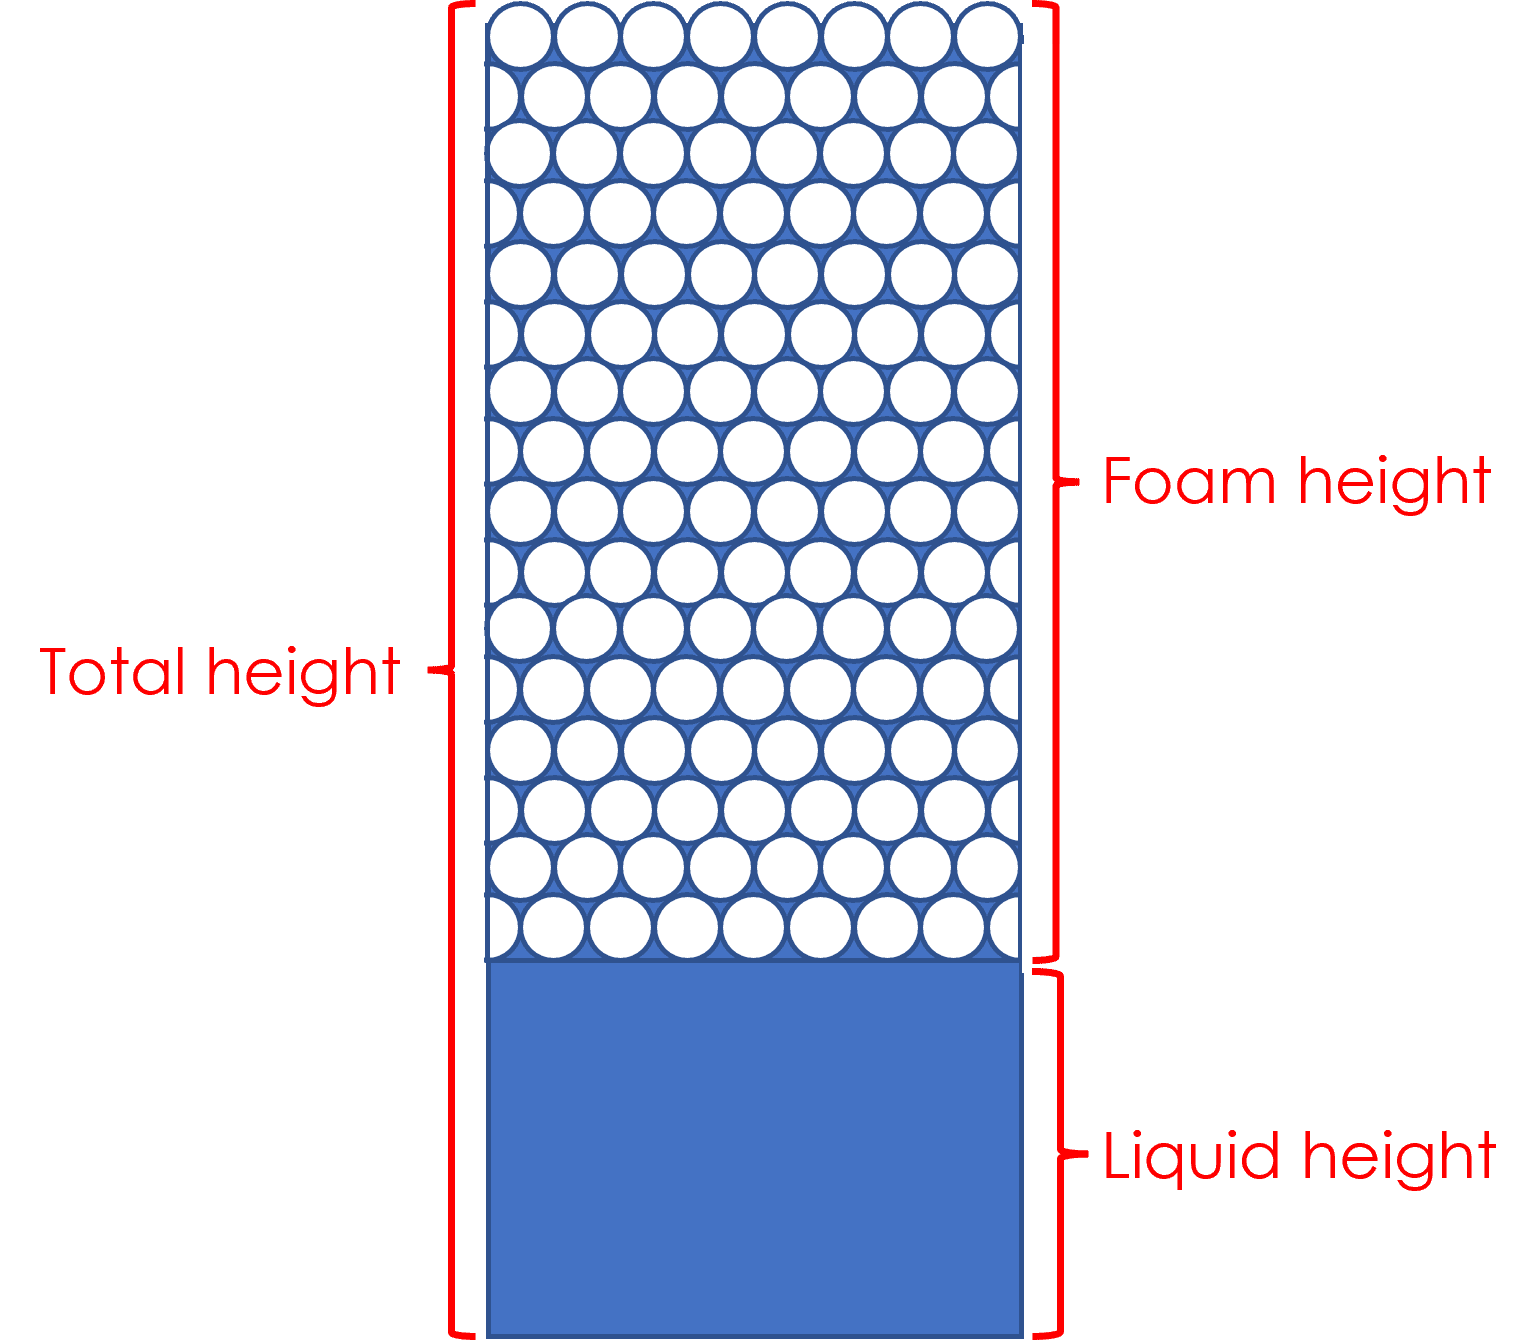 Illustration of foam and liquid fraction heights in the DFA column, and total height